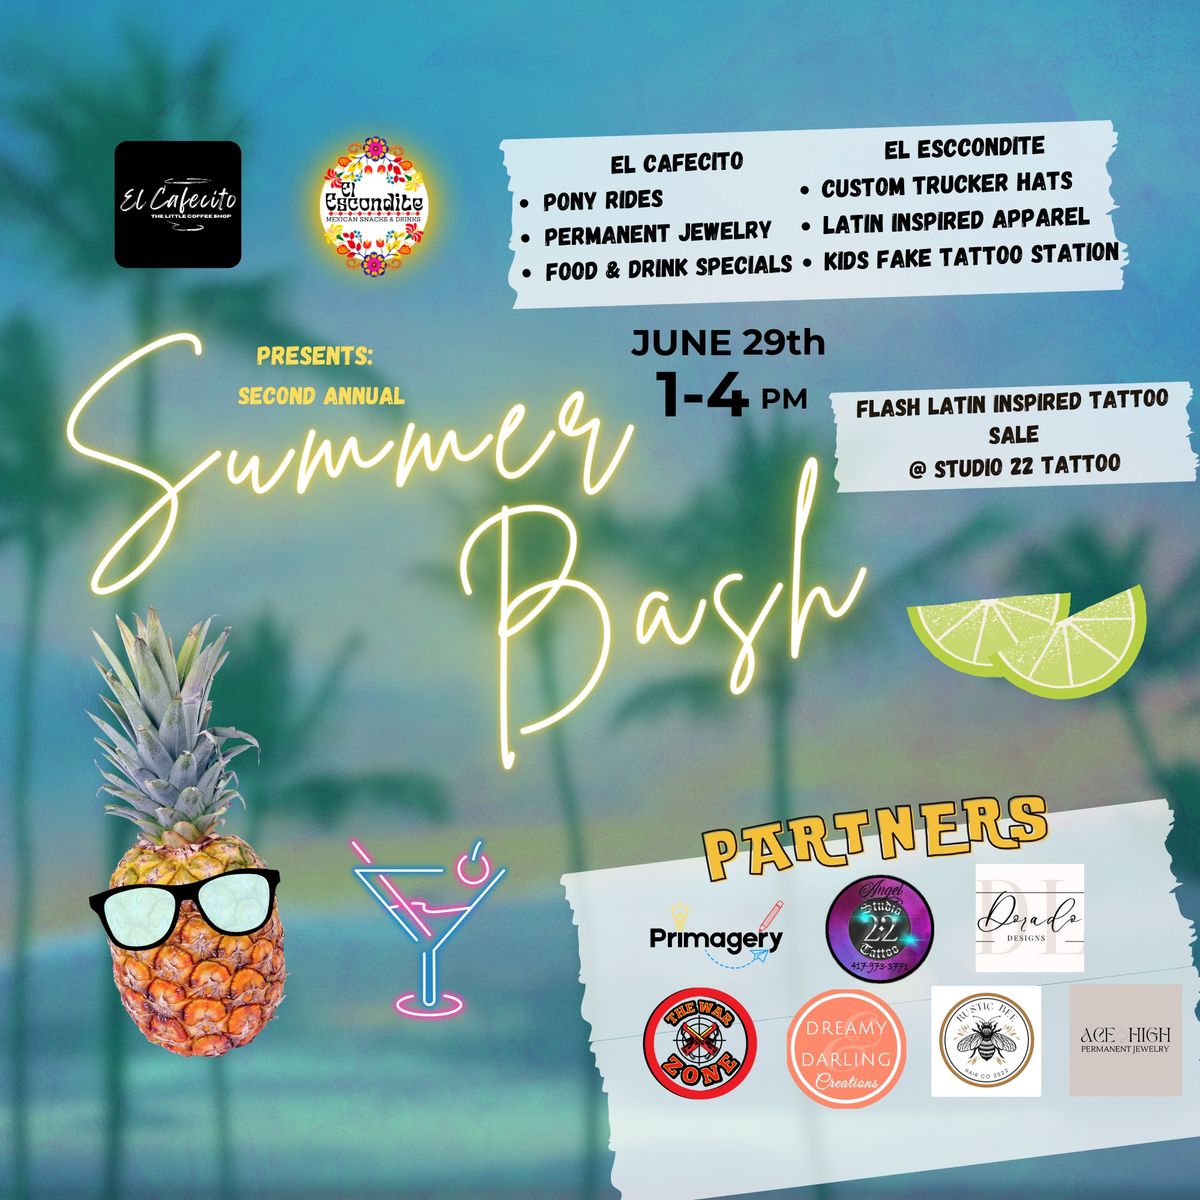 Second Annual Summer Bash